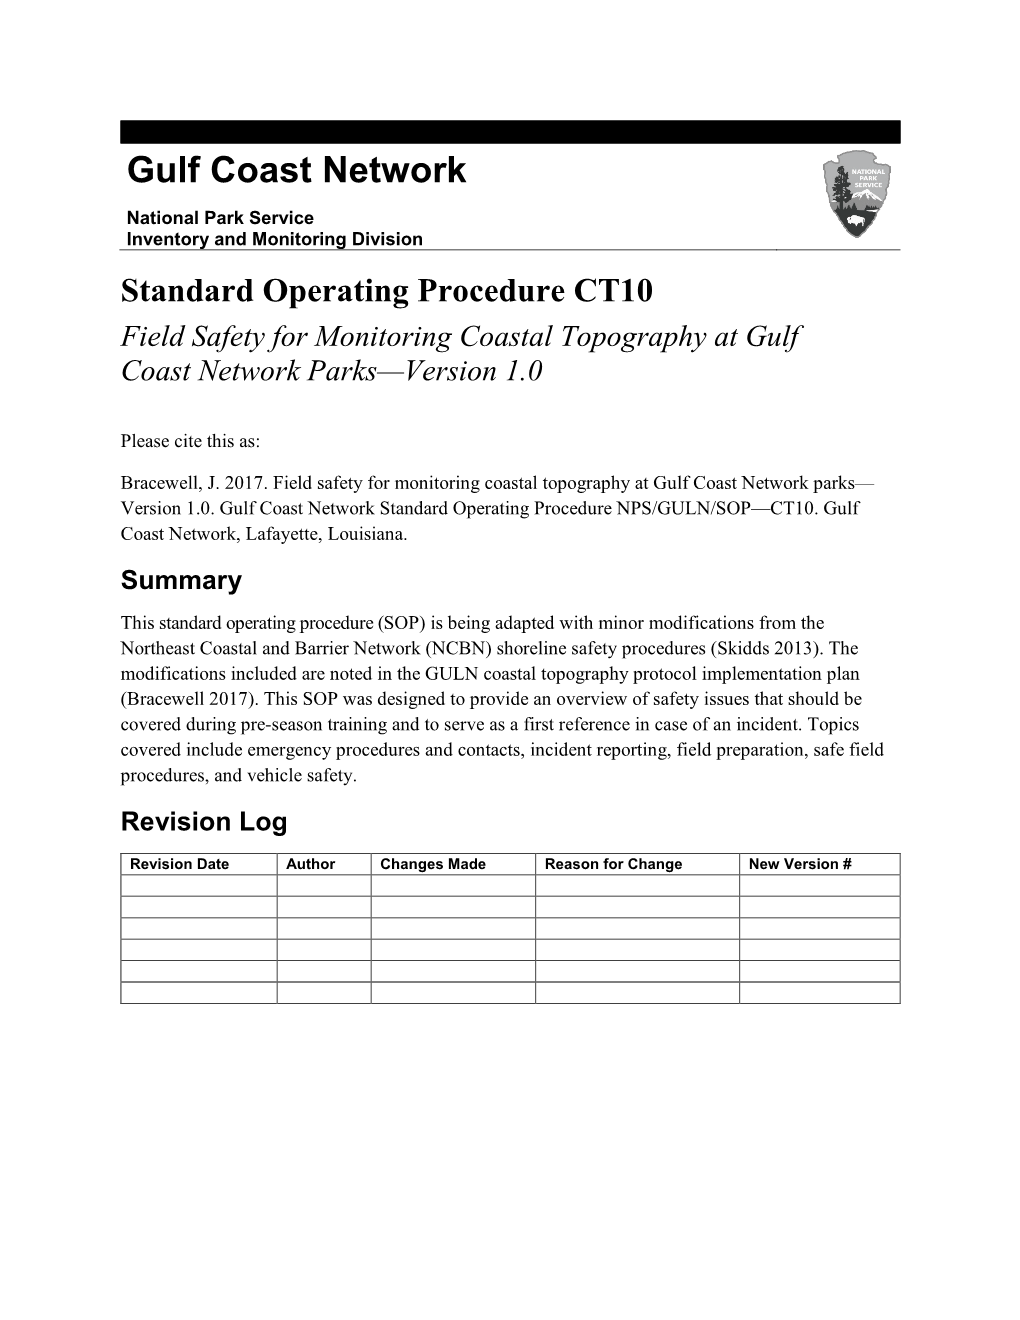 Standard Operating Procedure CT10: Field Safety for Monitoring Coastal